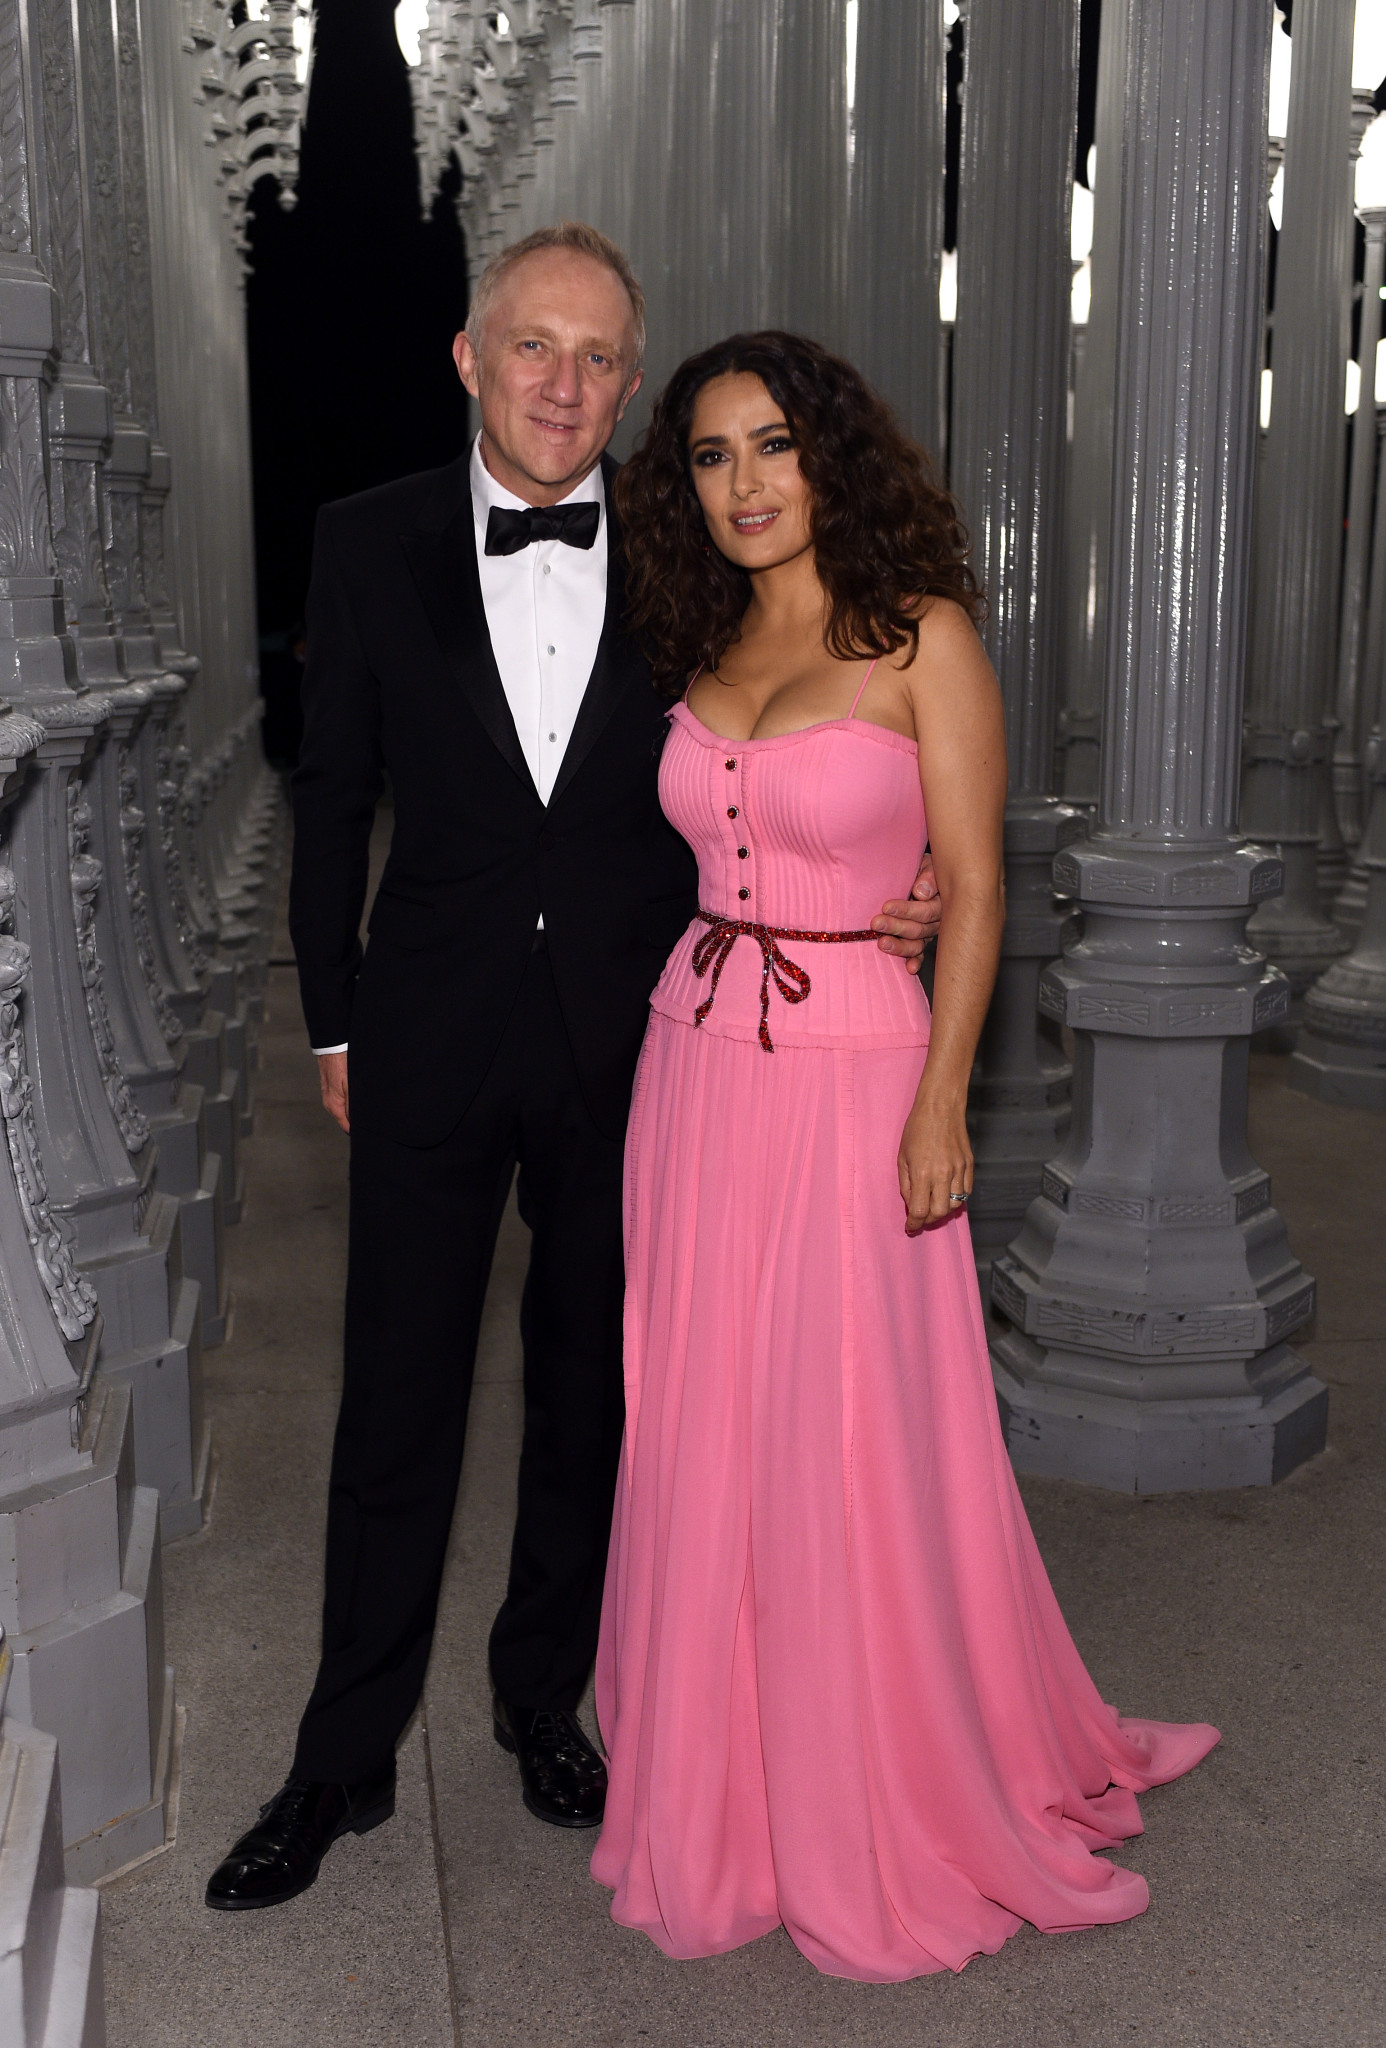 LOS ANGELES, CA - NOVEMBER 07:  Actress Salma Hayek (R) and businessman Francois-Henri Pinault attends LACMA 2015 Art+Film Gala Honoring James Turrell and Alejandro G Iñárritu, Presented by Gucci at LACMA on November 7, 2015 in Los Angeles, California.  (Photo by Stefanie Keenan/Getty Images for LACMA) 